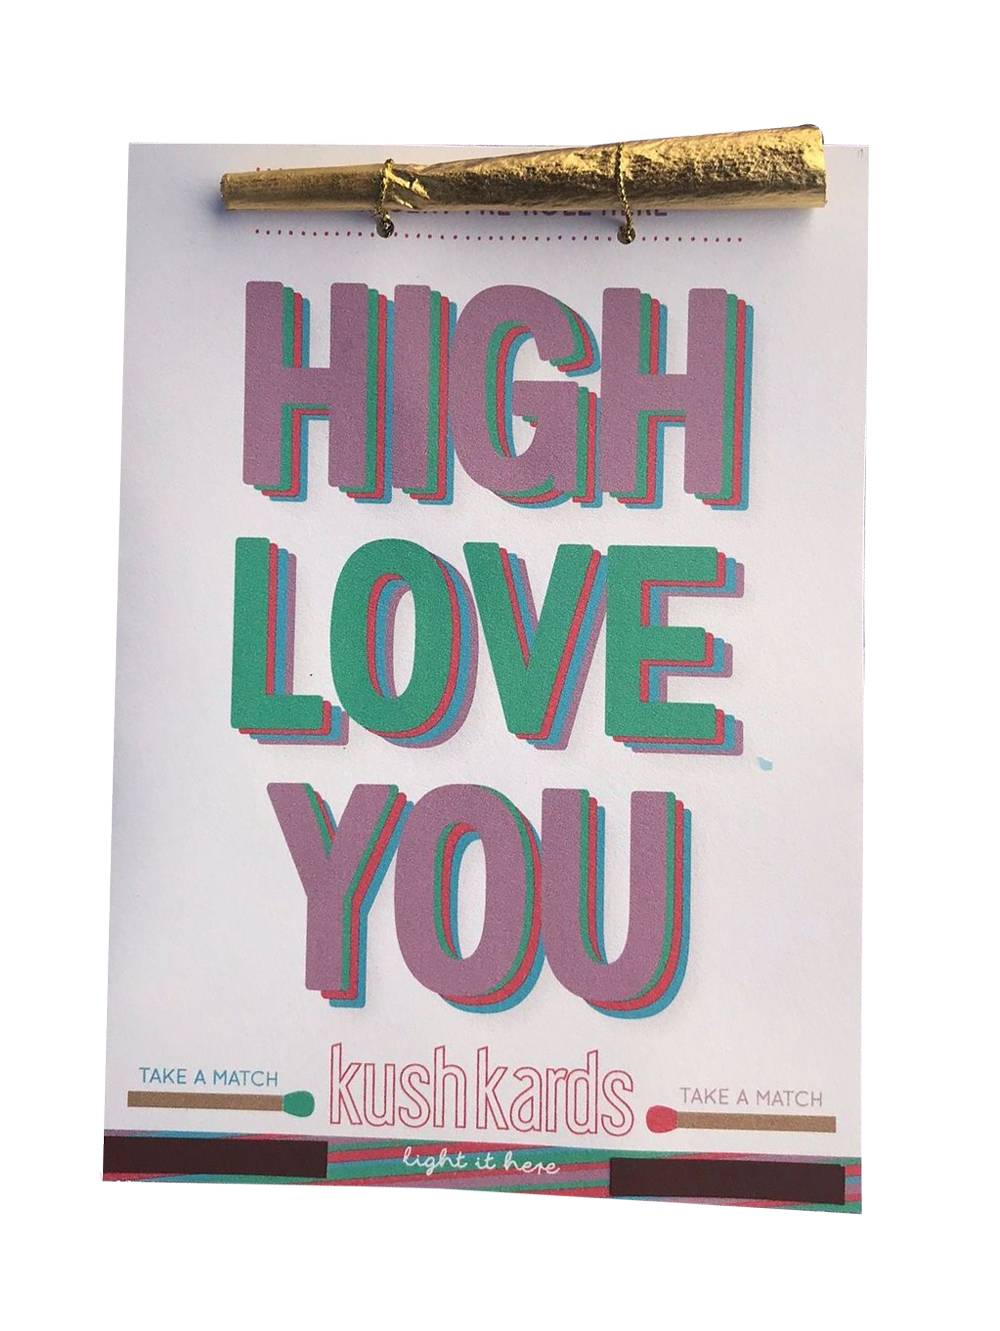 KUSHKARDS JUST ADD A PRE-ROLL GREETING CARD - HIGH LOVE YOU